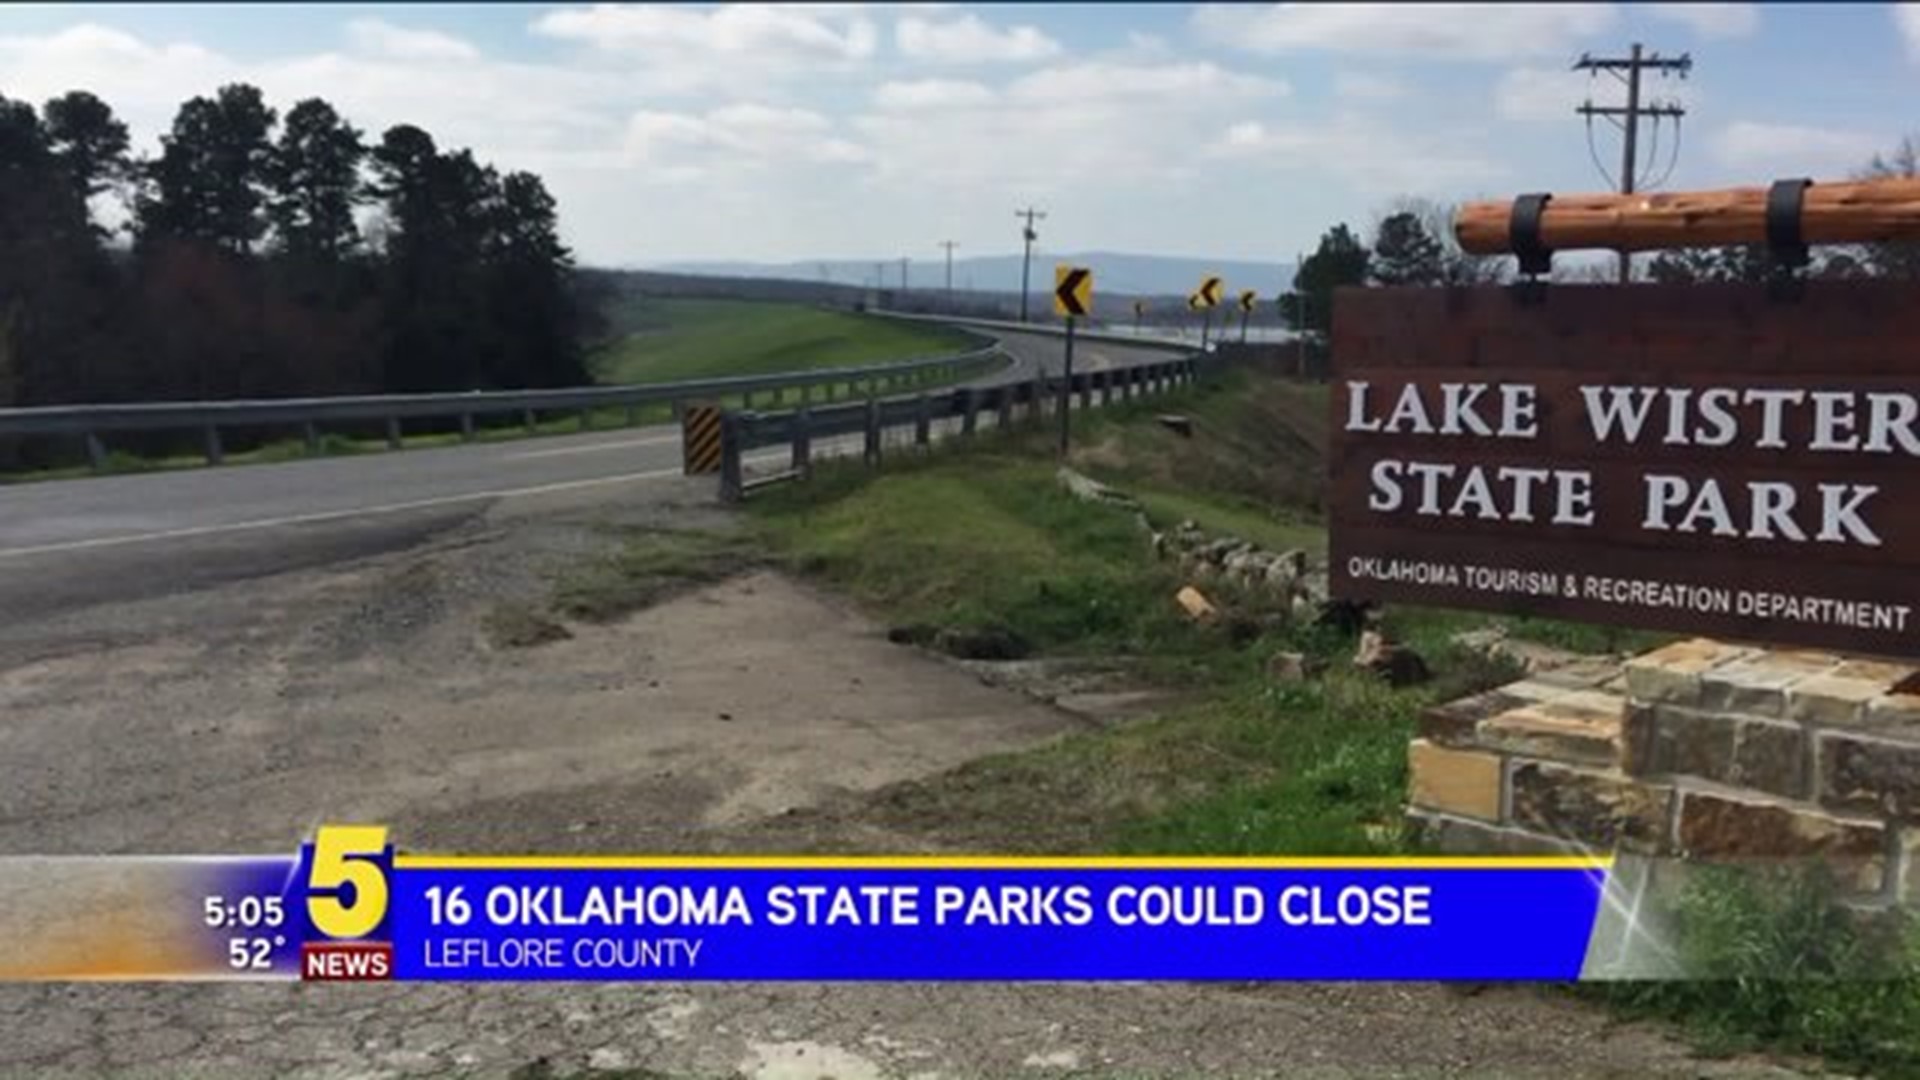 16 Oklahoma State Parks Could Close